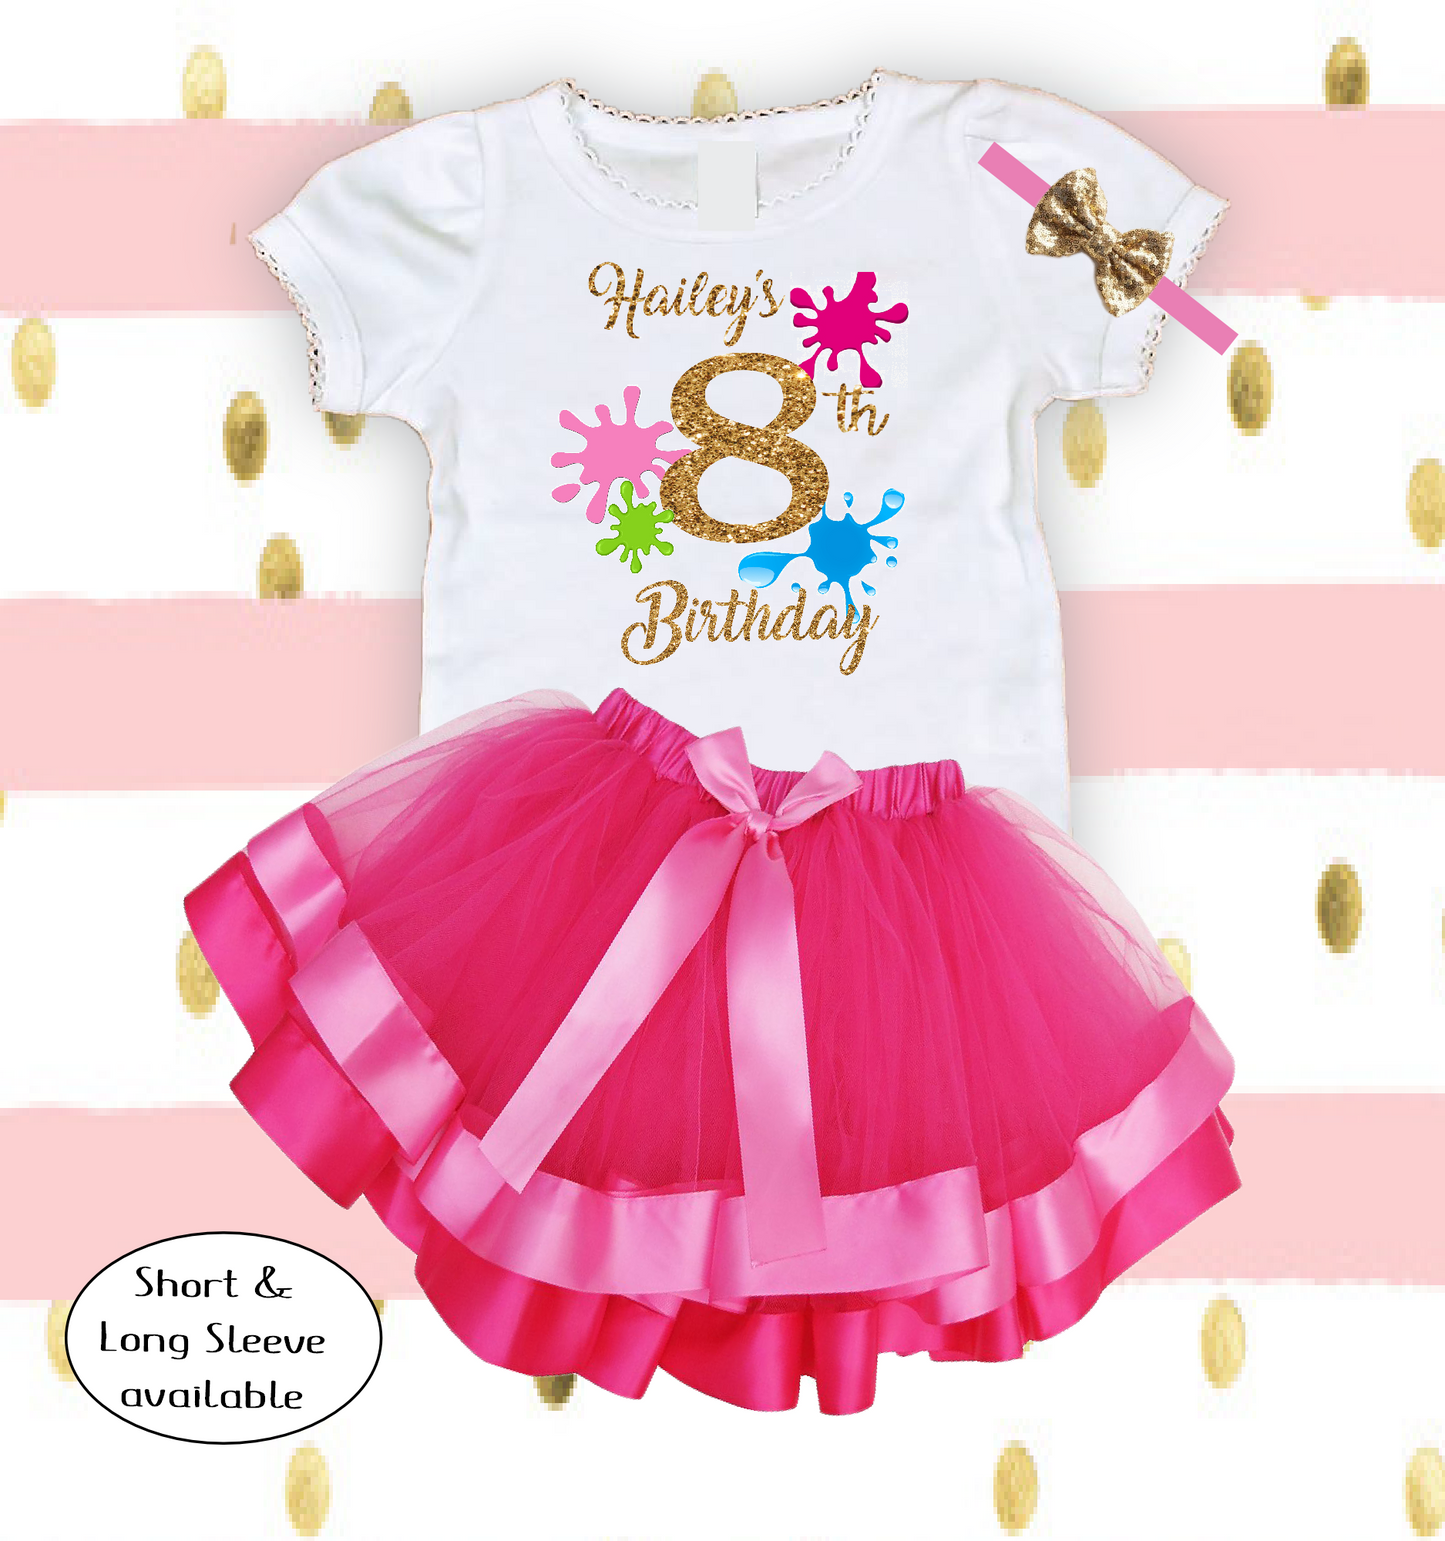 Slime Queen Birthday Tutu Outfit